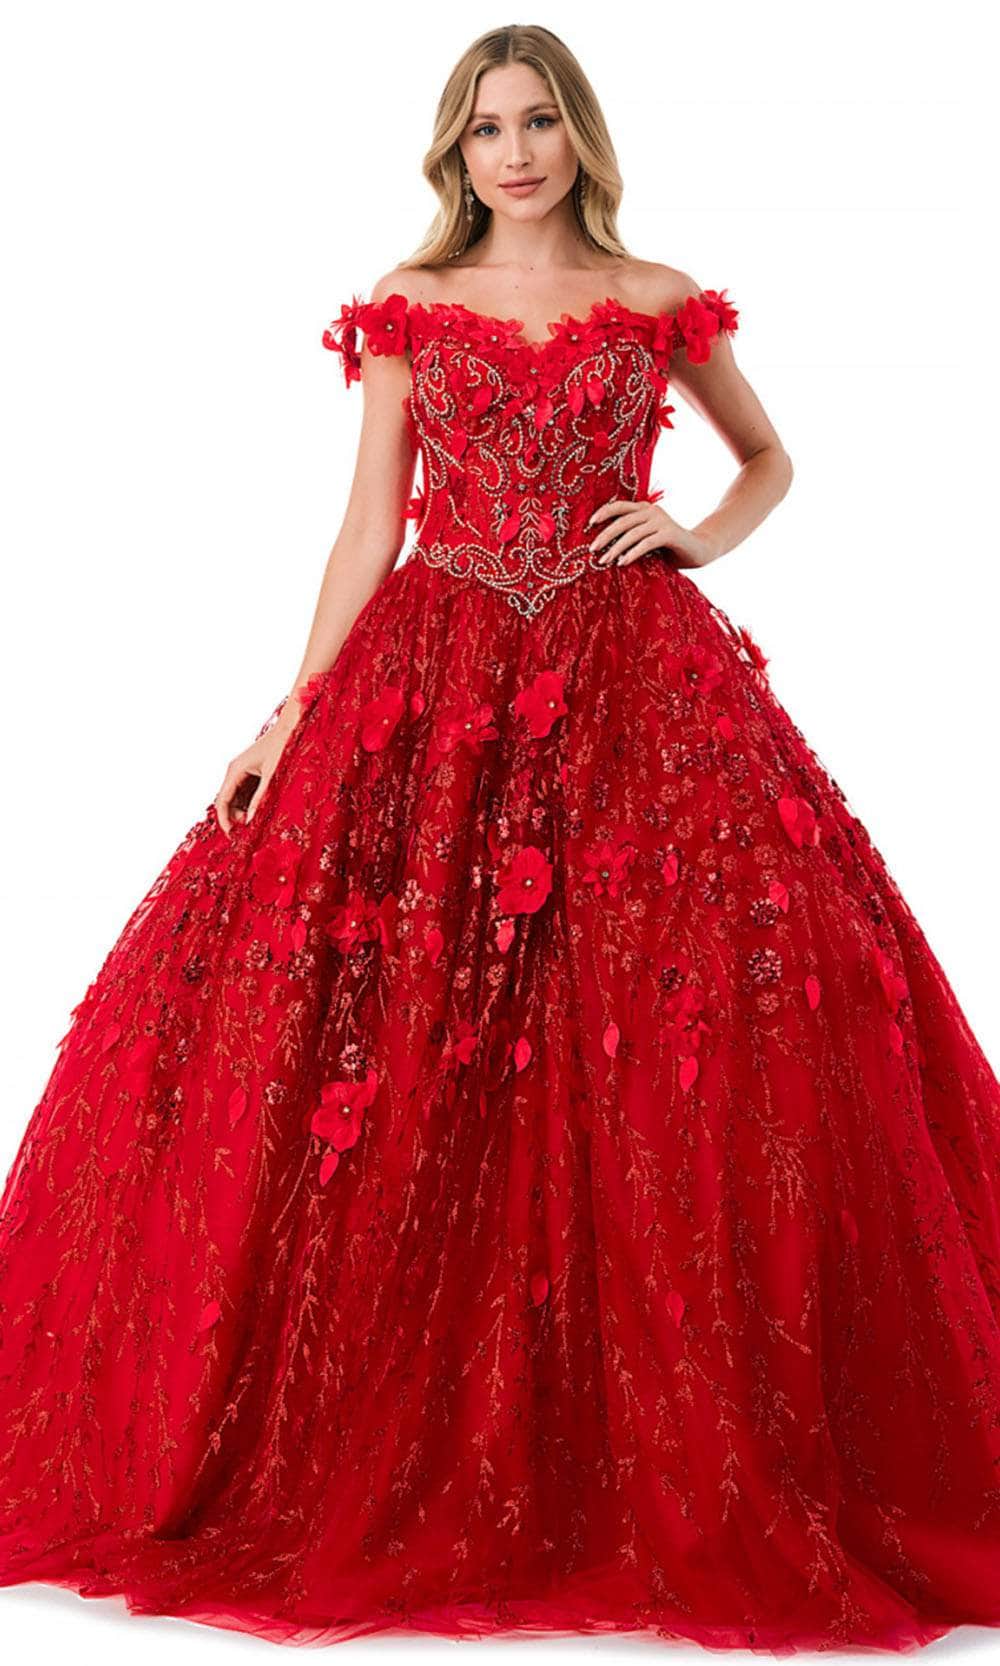 Aspeed Design L2728 - Sweetheart Embellished Ballgown XXS / Red